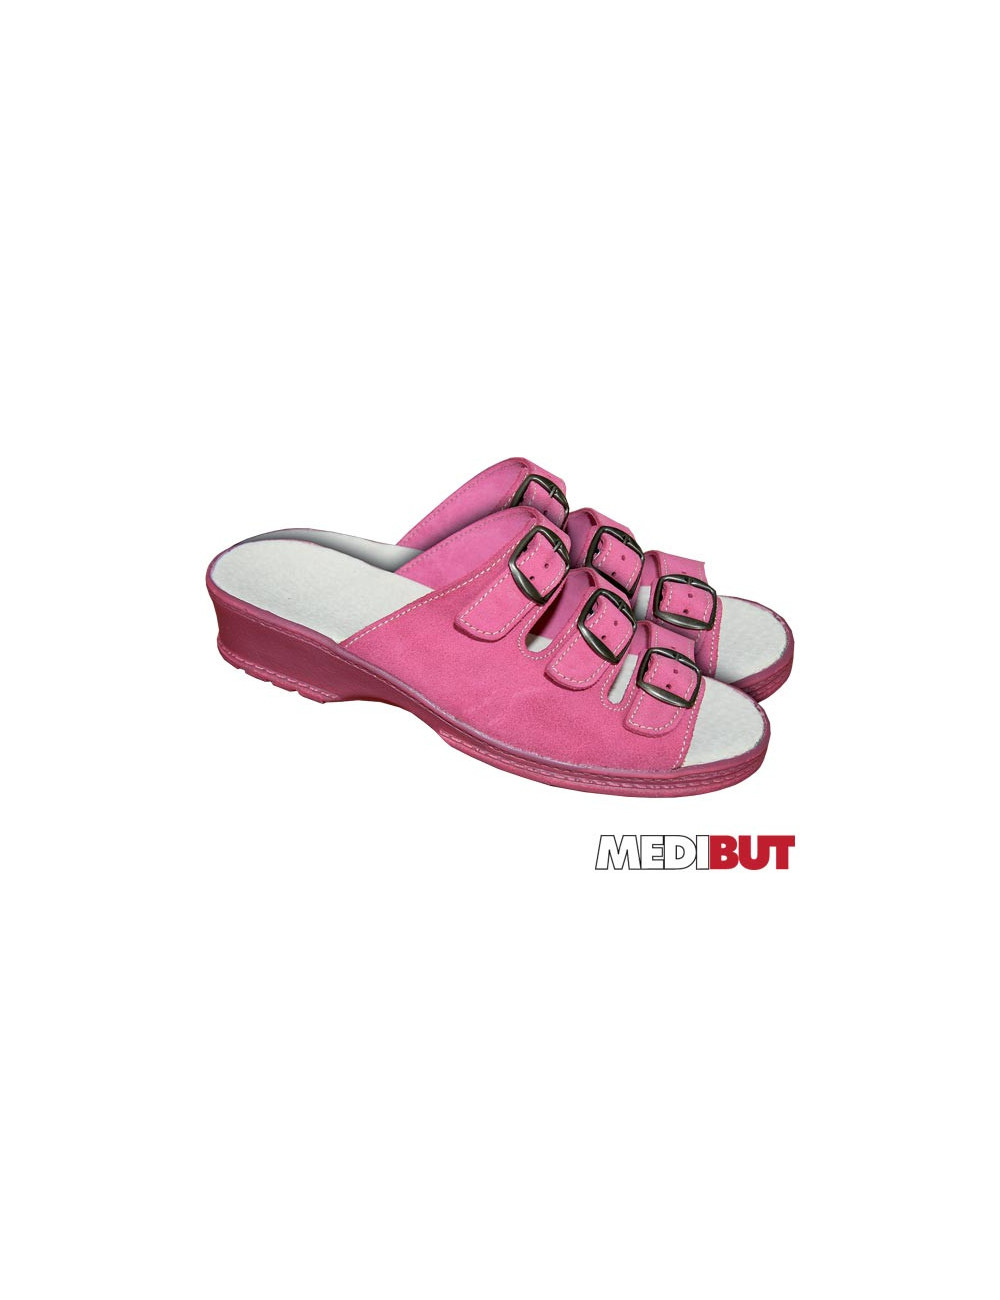 Occupational shoes bmbioform r pink Medibut